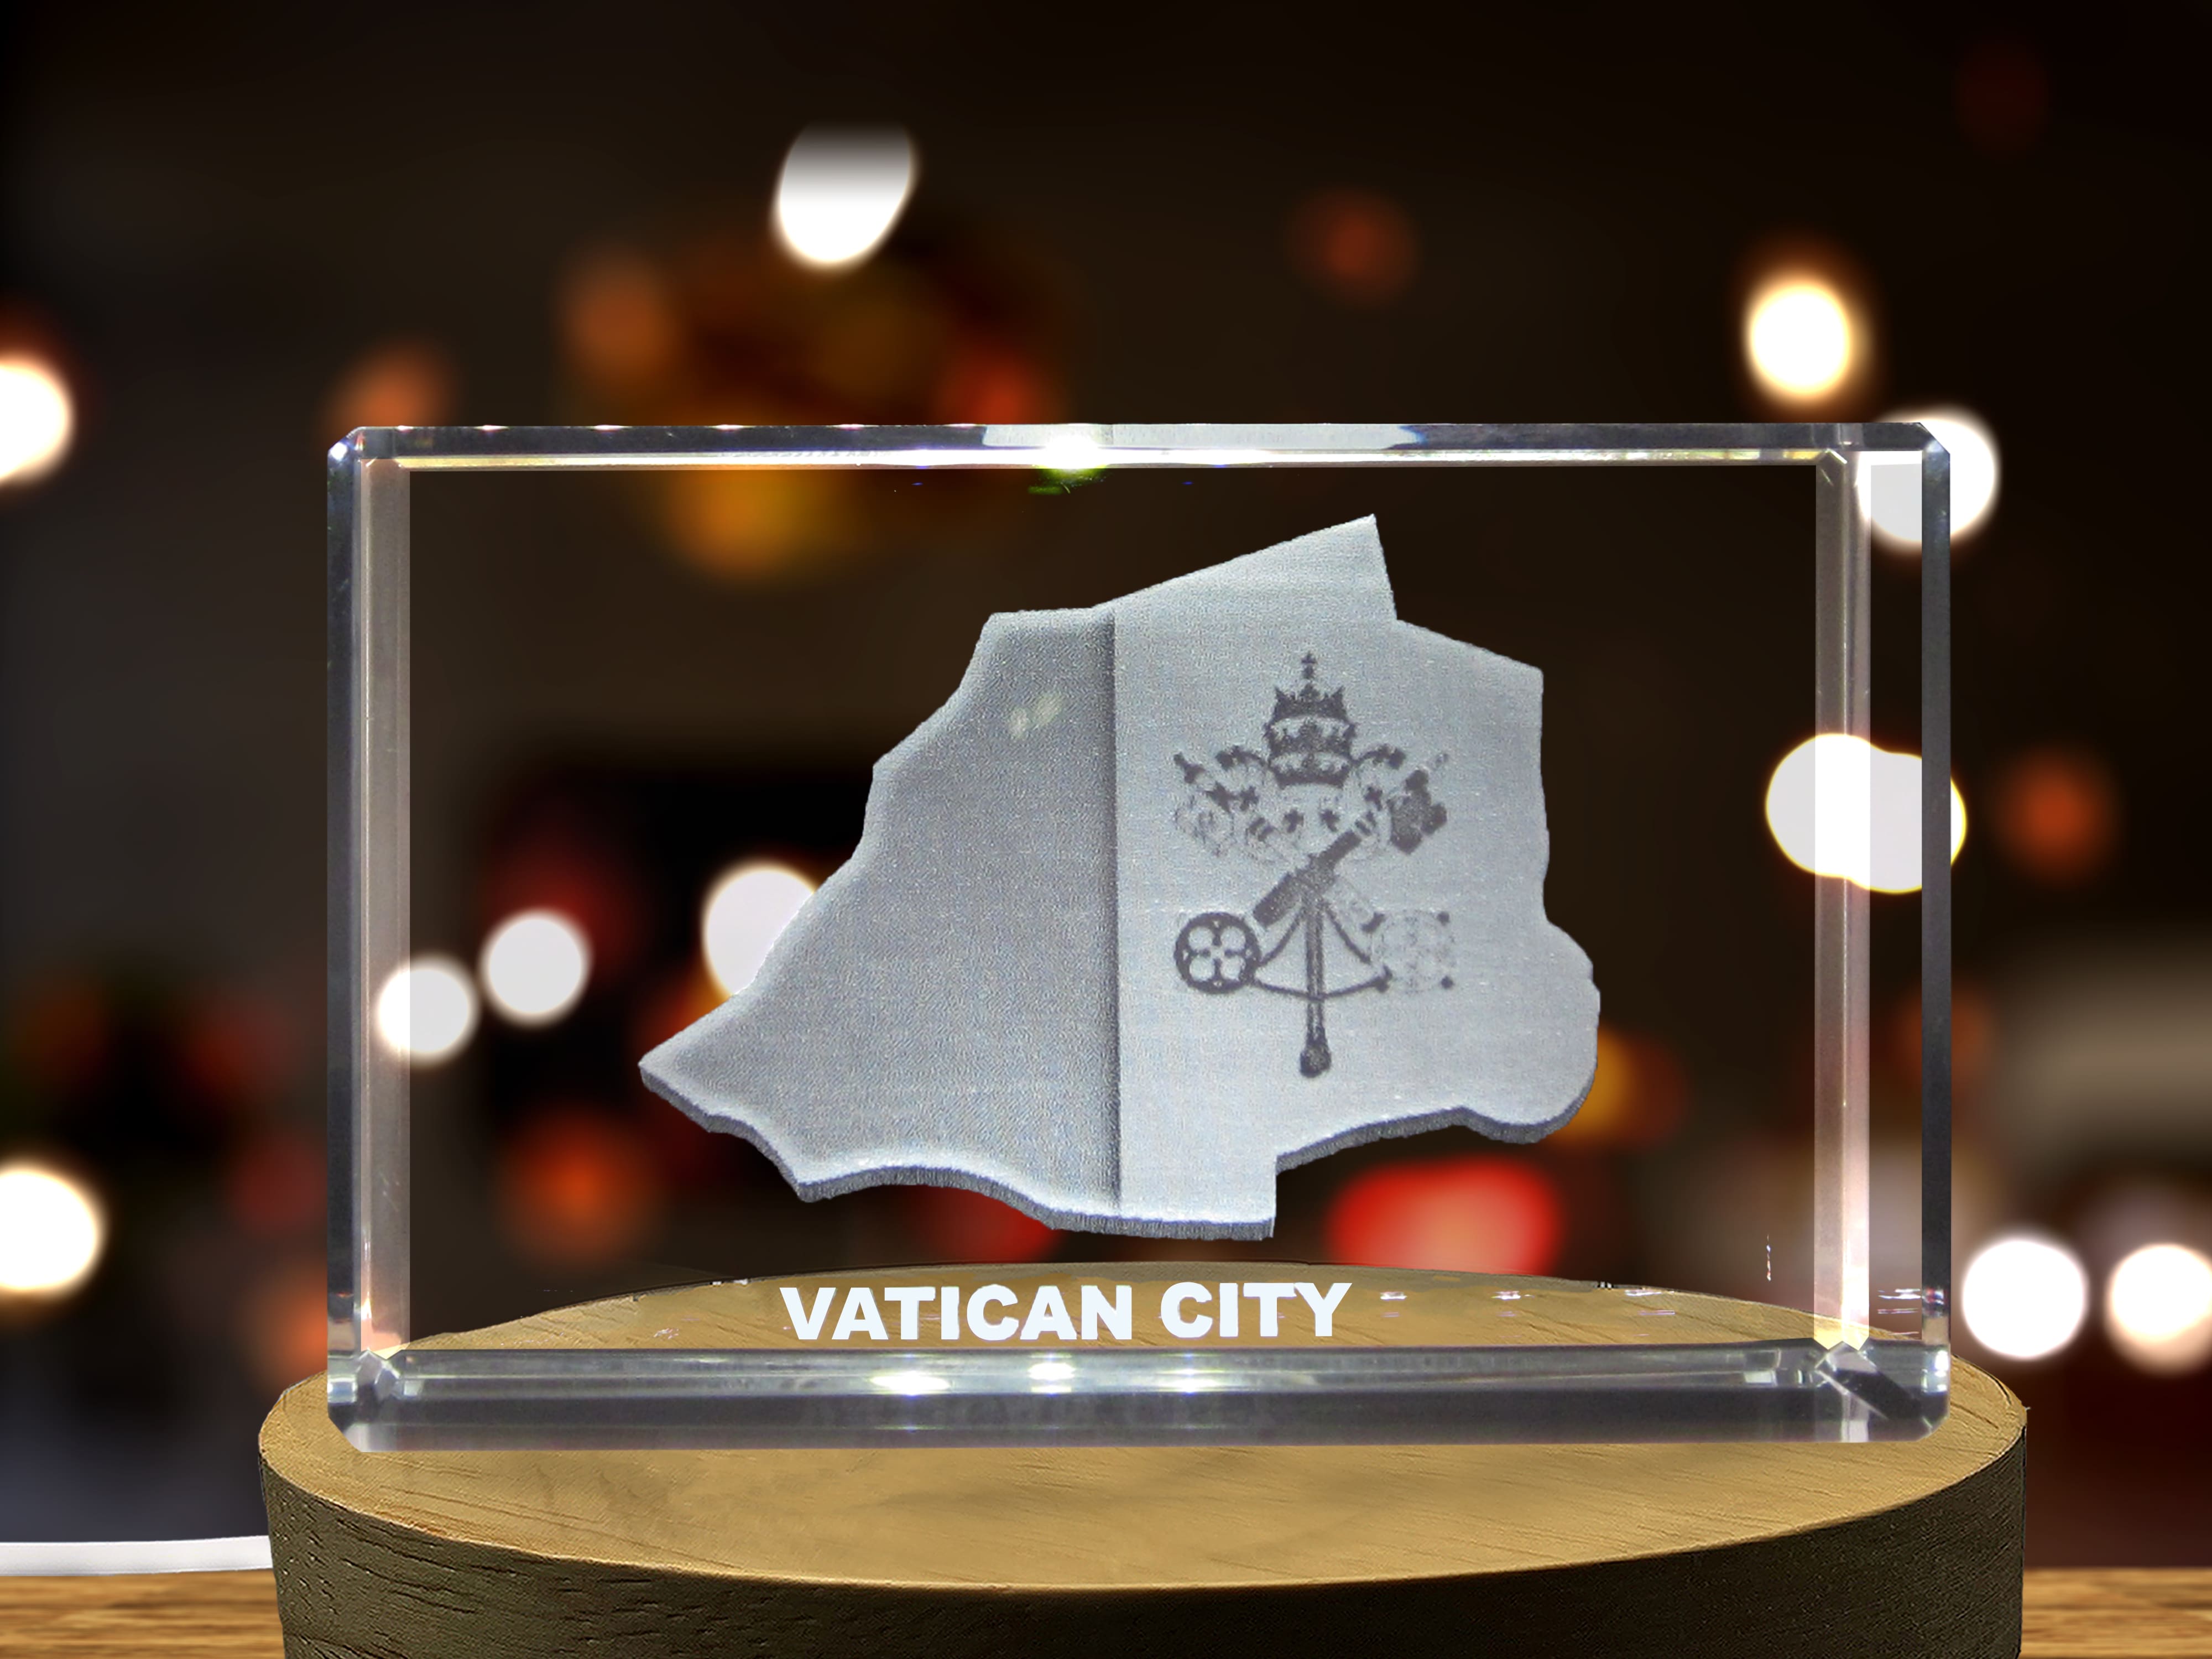 Holy See (Vatican City) 3D Engraved Crystal 3D Engraved Crystal Keepsake/Gift/Decor/Collectible/Souvenir A&B Crystal Collection